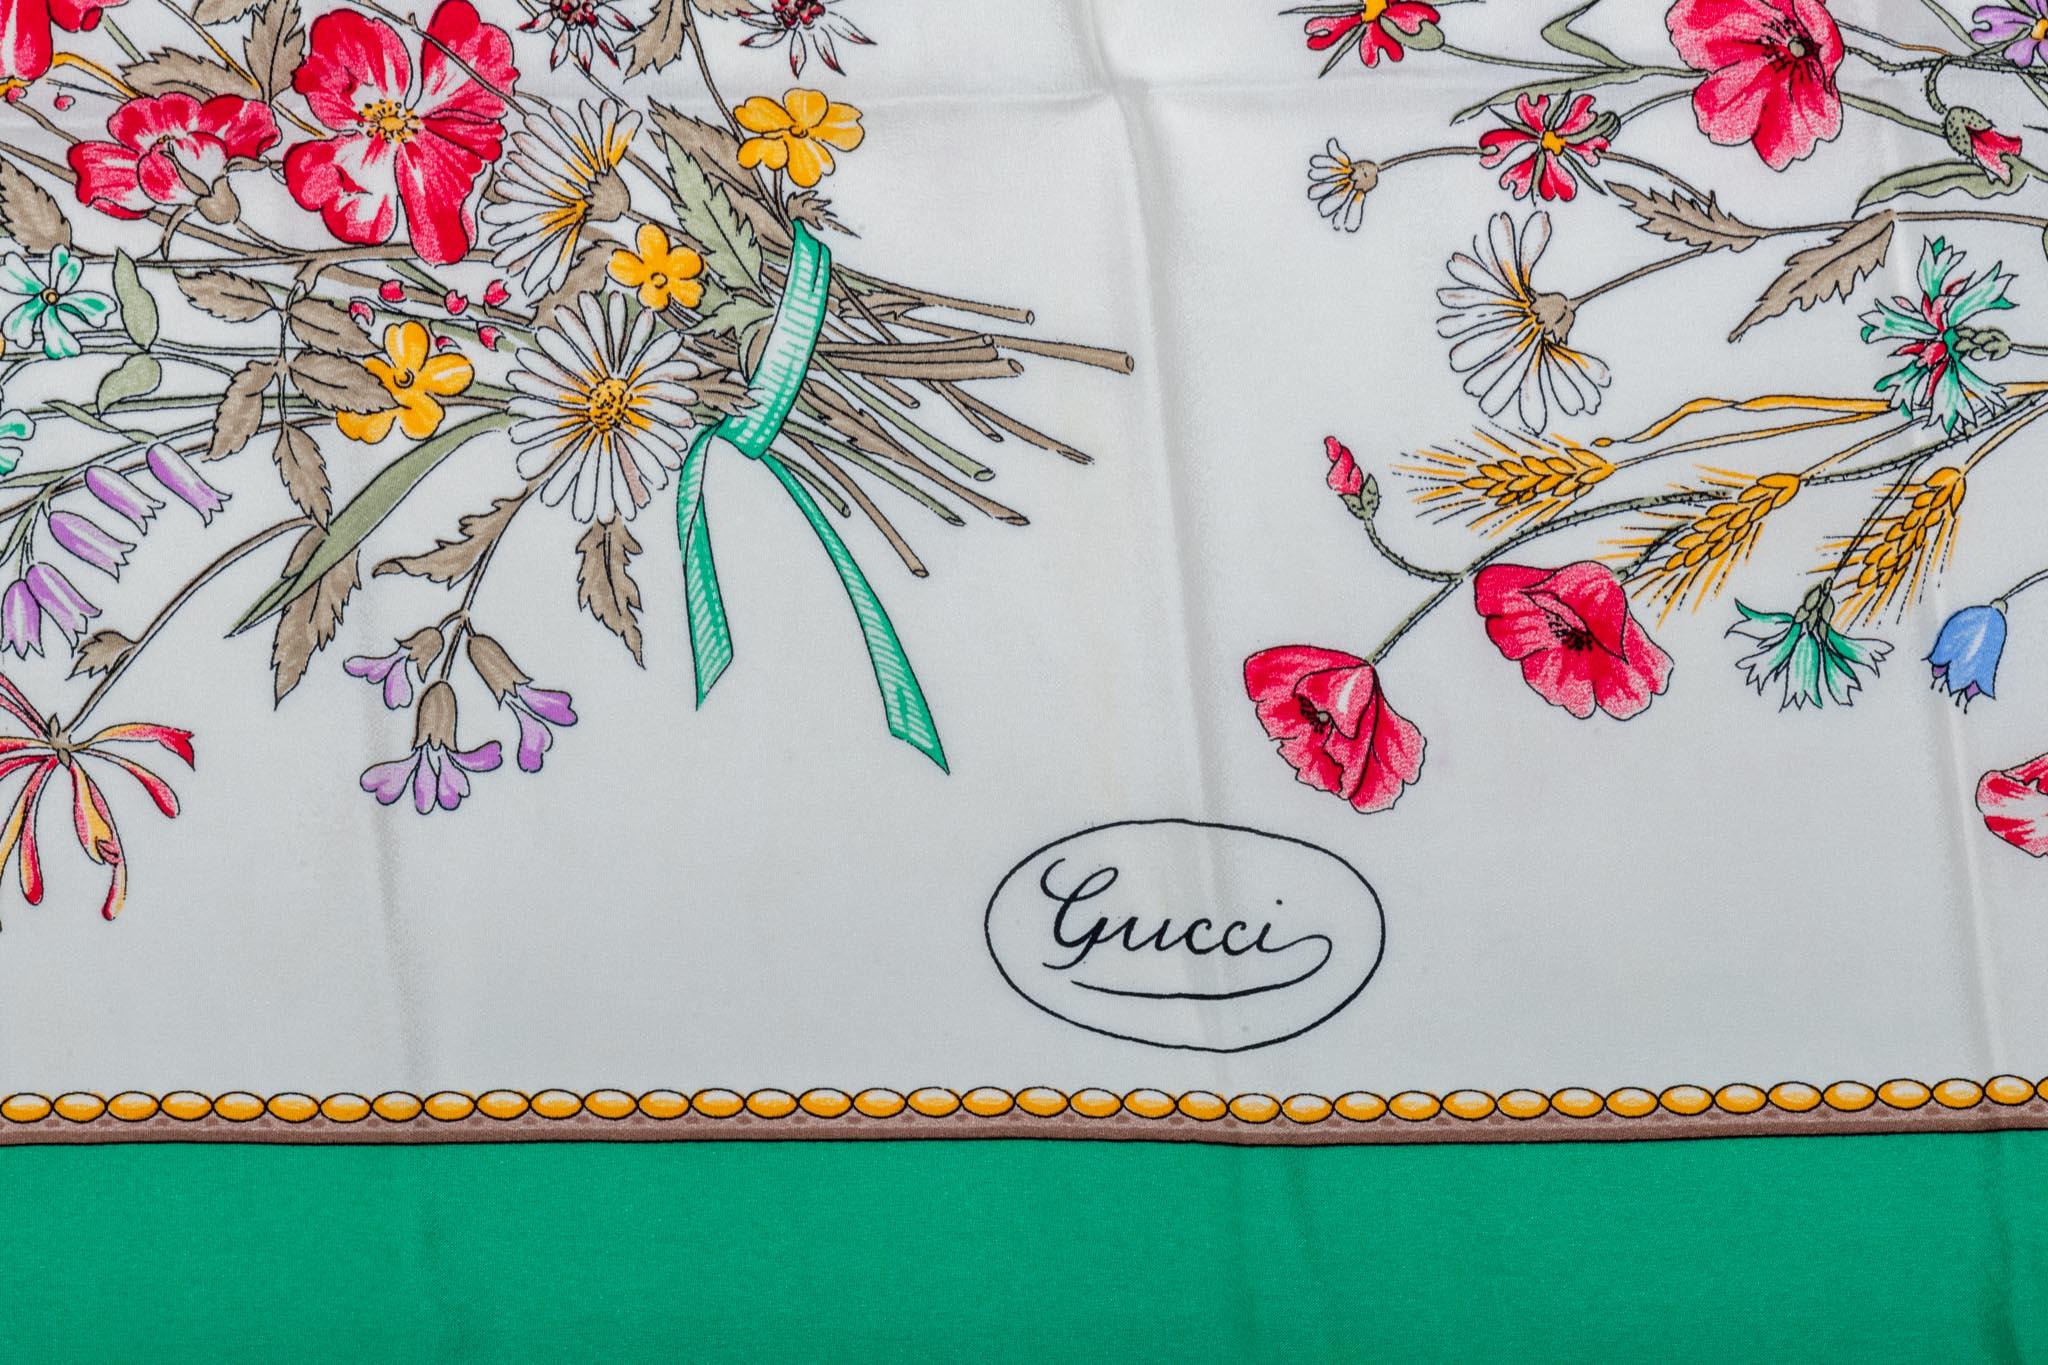 Gucci silk chiffon floral and bunny scarf. Hand rolled edges. Does not include box.